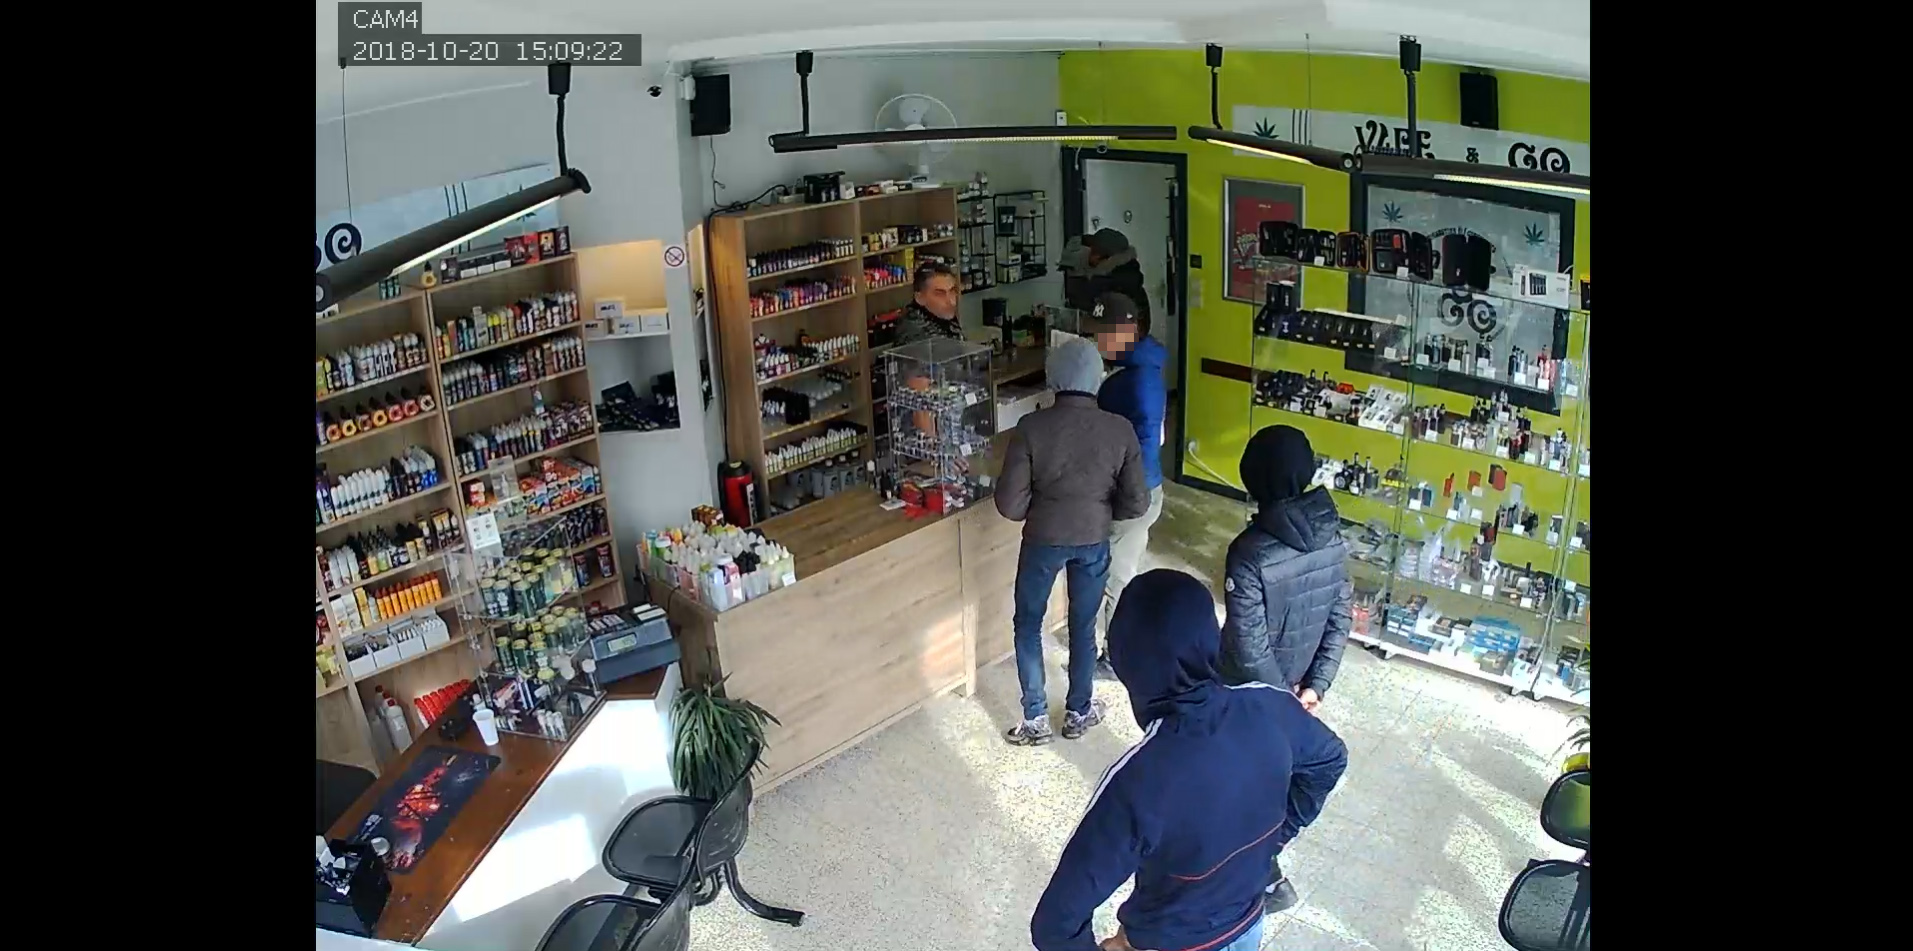 PHOTO: A group of six men are pictured talking to the owner of an e-cigarette store in Montignies-sur-Sambre, Belgium, Oct. 20, 2018. Police say the men attempted to rob the store, but were asked to come back later by the owner.